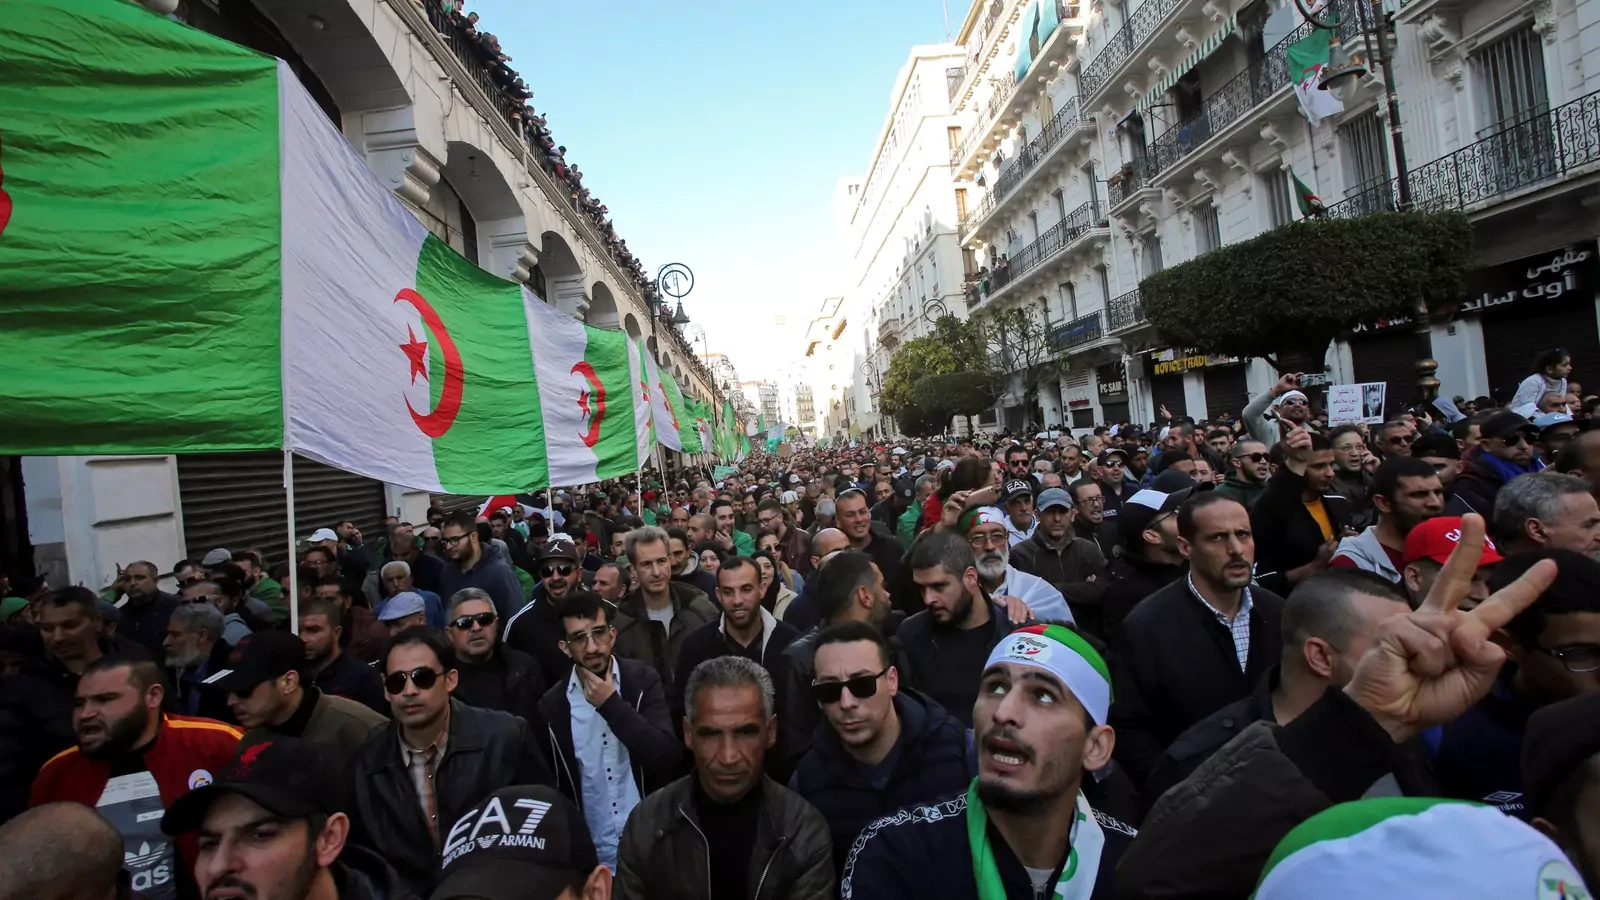 Demonstrators carry a national flag during an anti-government rally in Algiers, Algeria January 3, 2020.